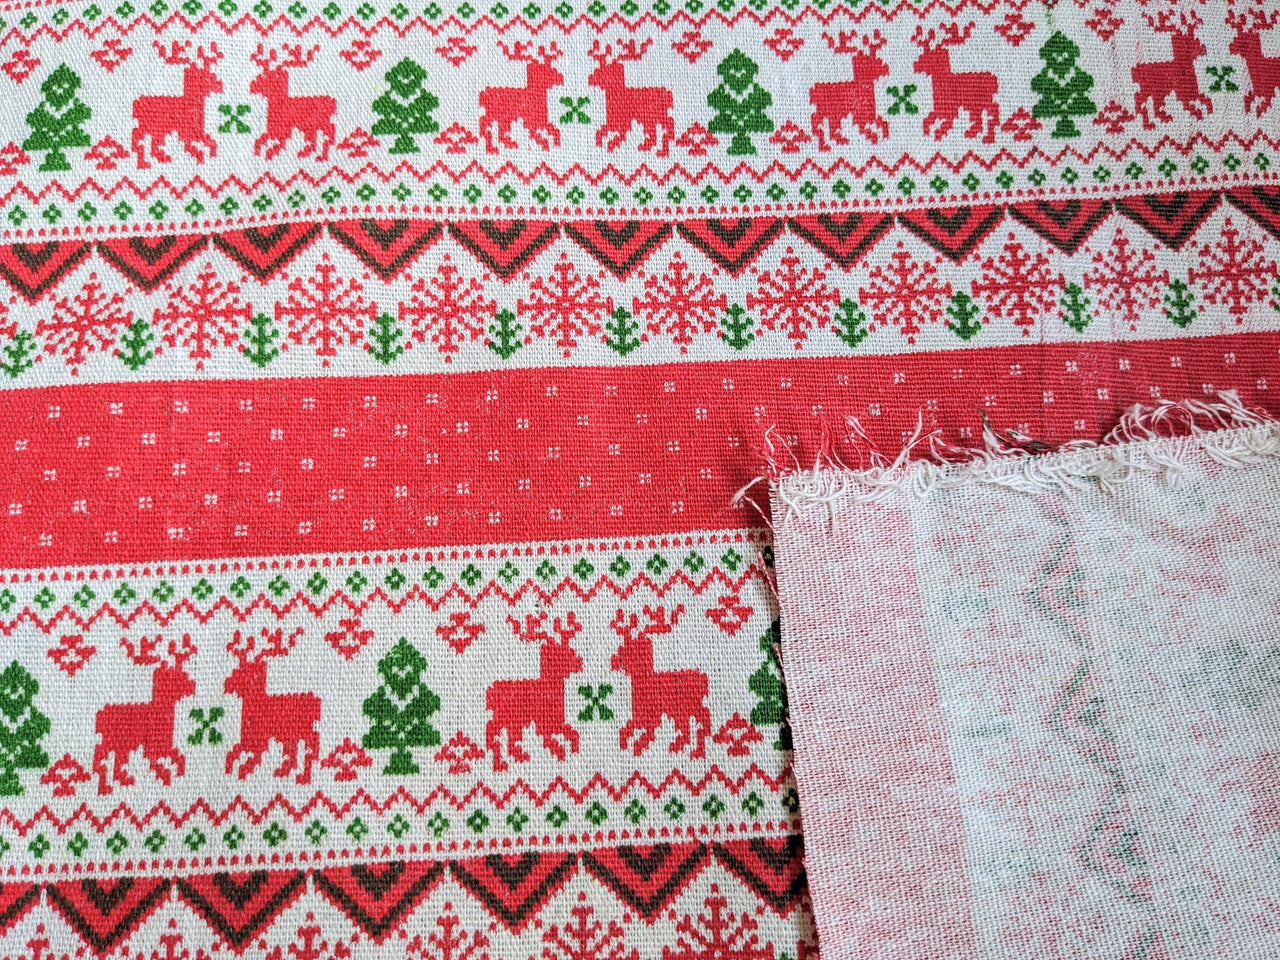 Reindeer Snowflakes Stripes Canvas Fabric, Red And White Fabric, Scandinavian Christmas Fabric